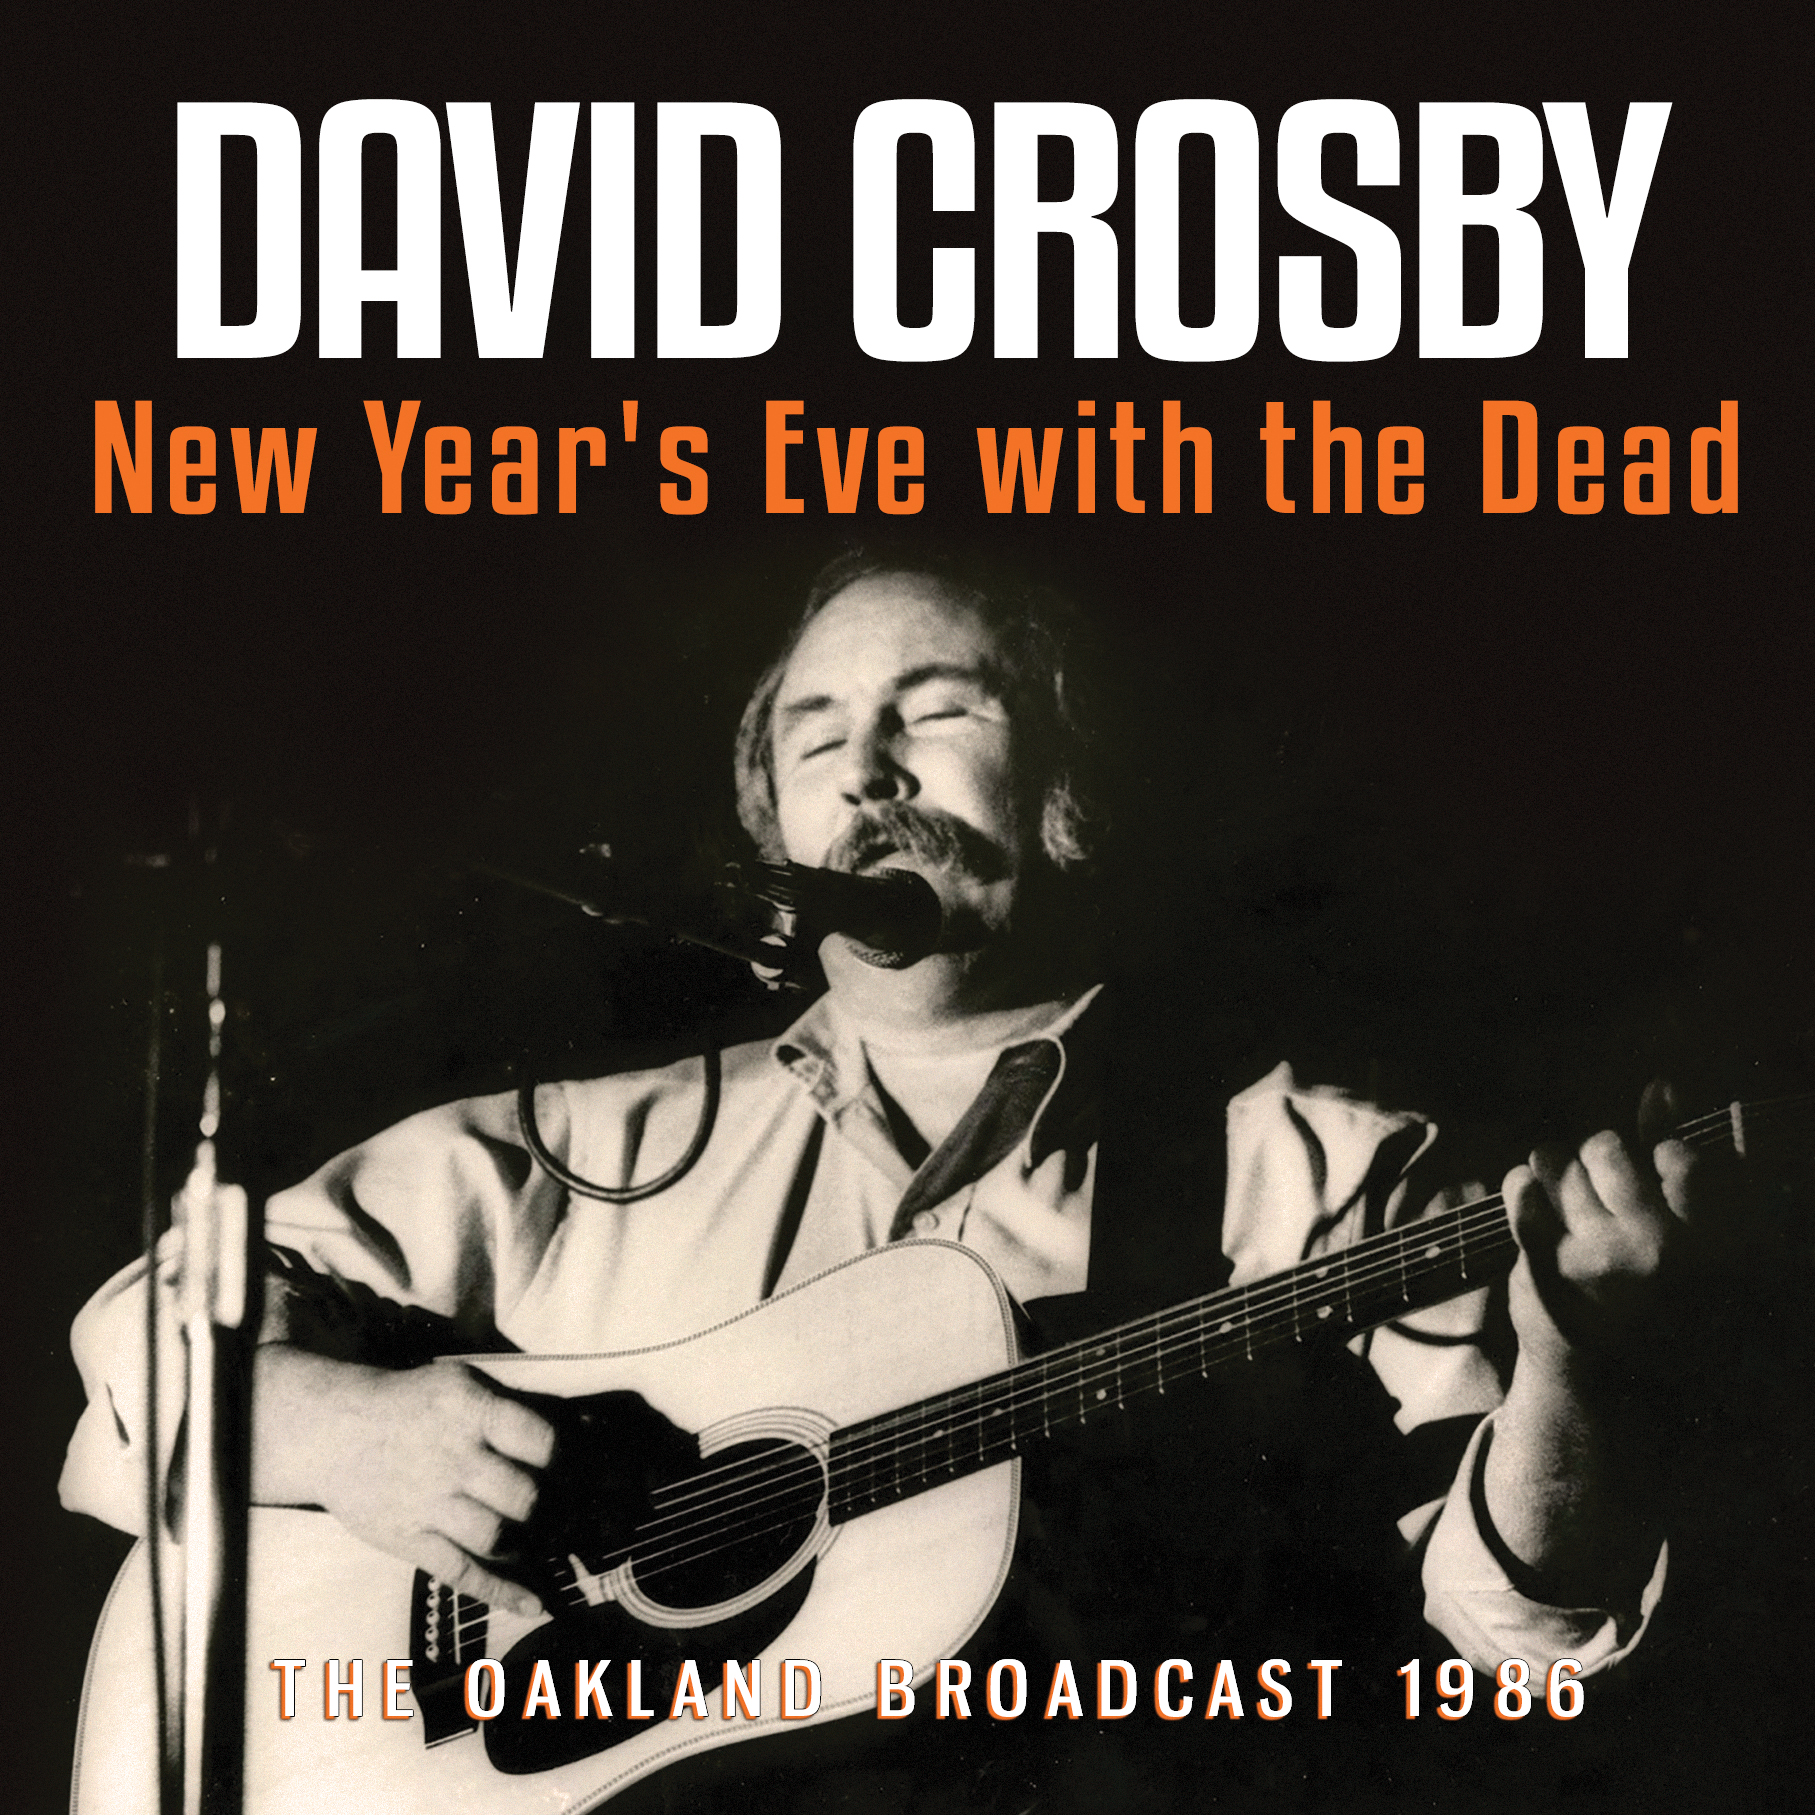 David Crosby - New Year's Eve With The Dead - MVD Entertainment Group B2B